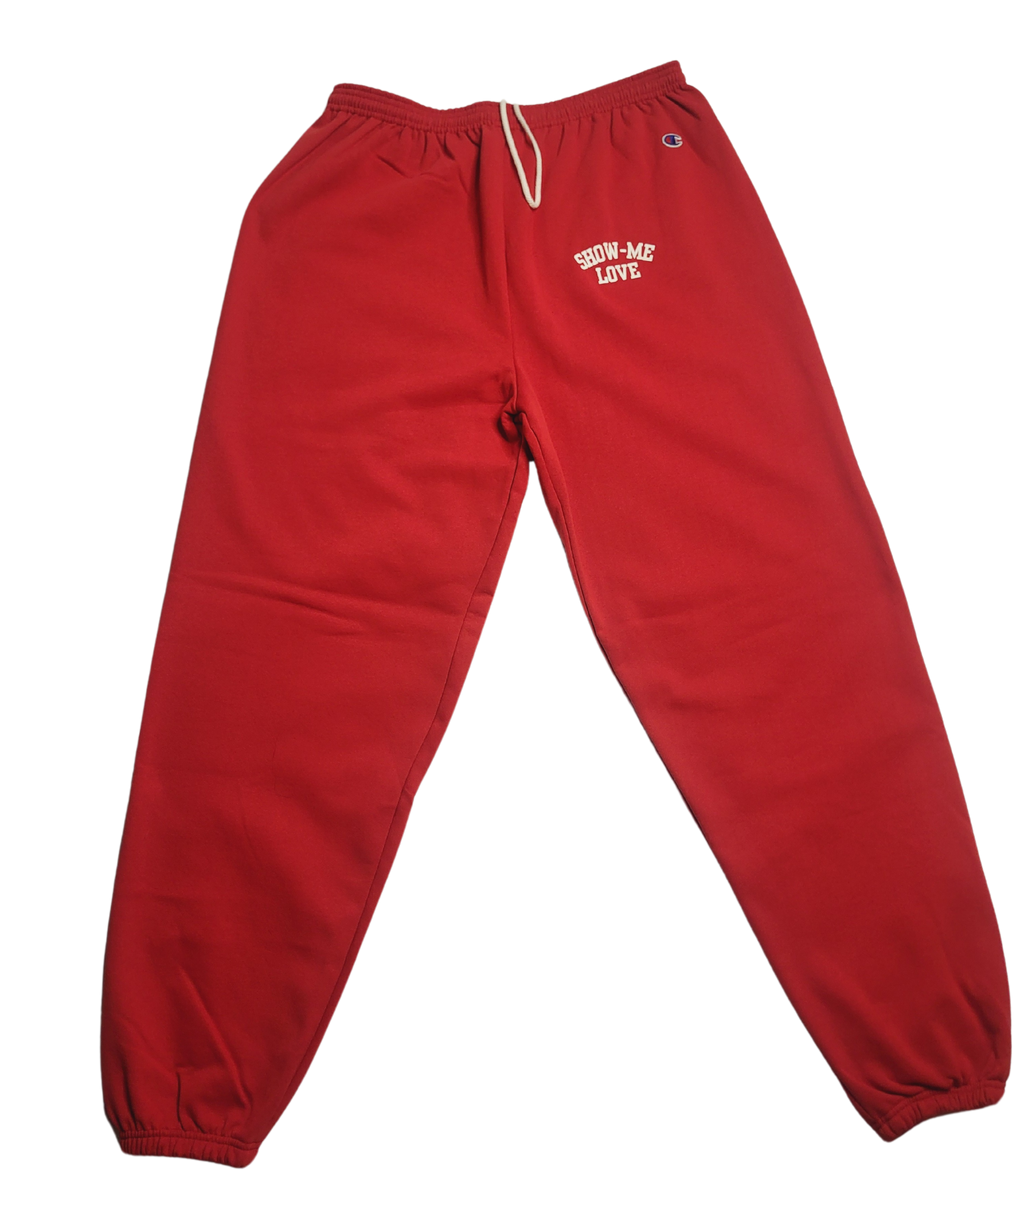 (PRE-ORDER) 314 Day Everyday Show Me Love Jogging Pants- RED - SHOW ME LOVE